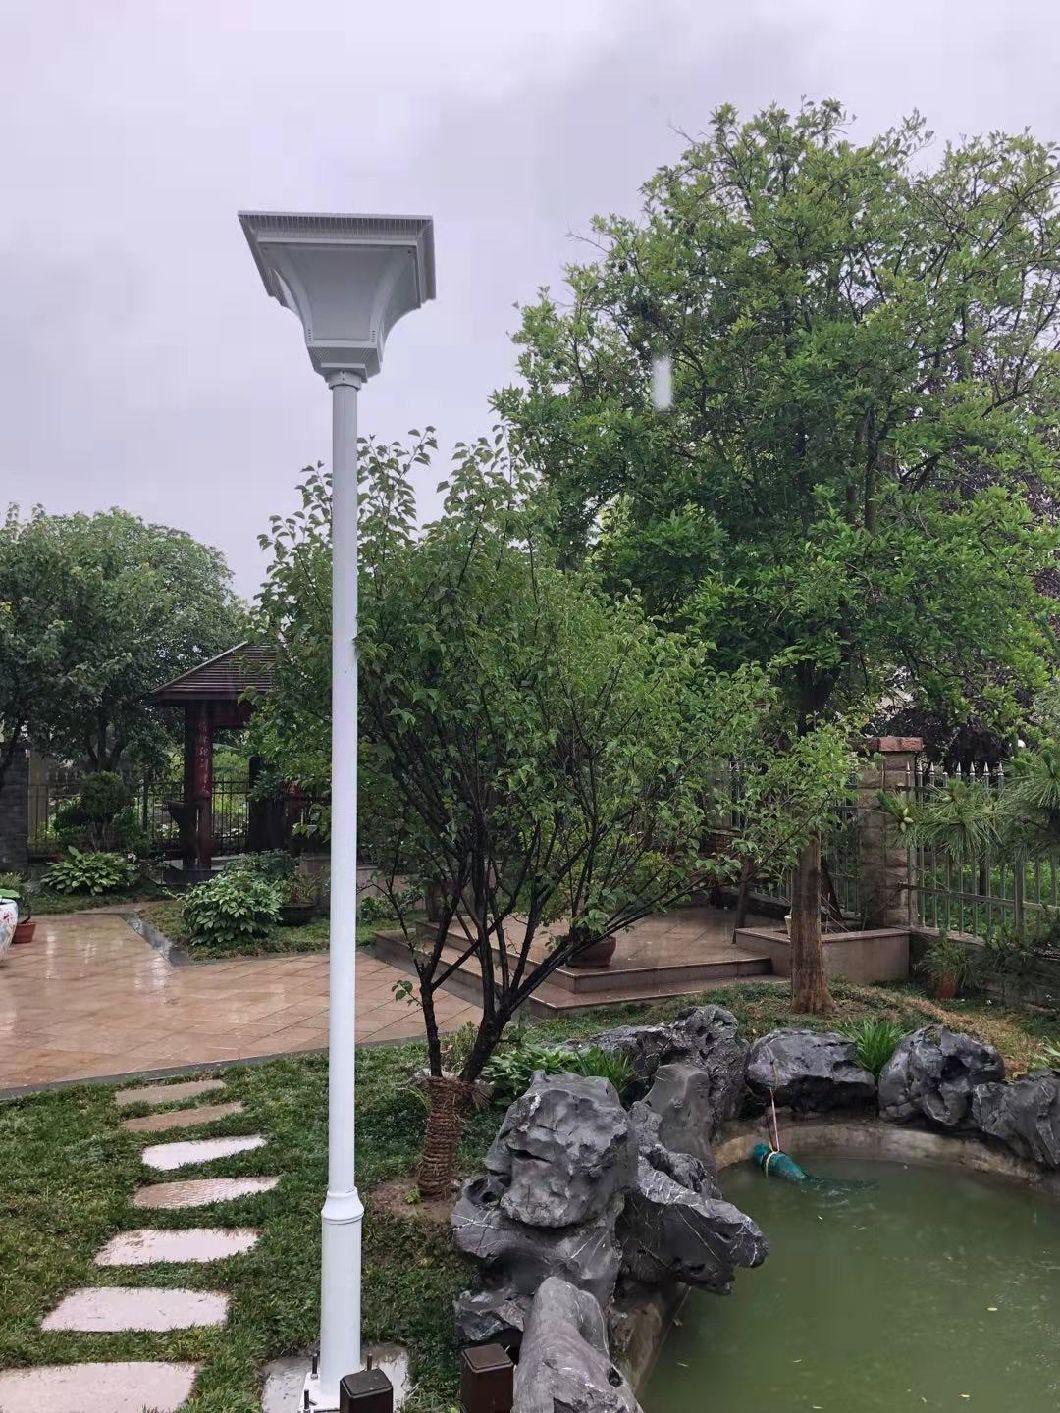 Factory Supplier Outdoor LED Landscape Light for Lawn Patio Pathway Yard Walkway Full High Power Solar Sensor Warm White Solar Lights